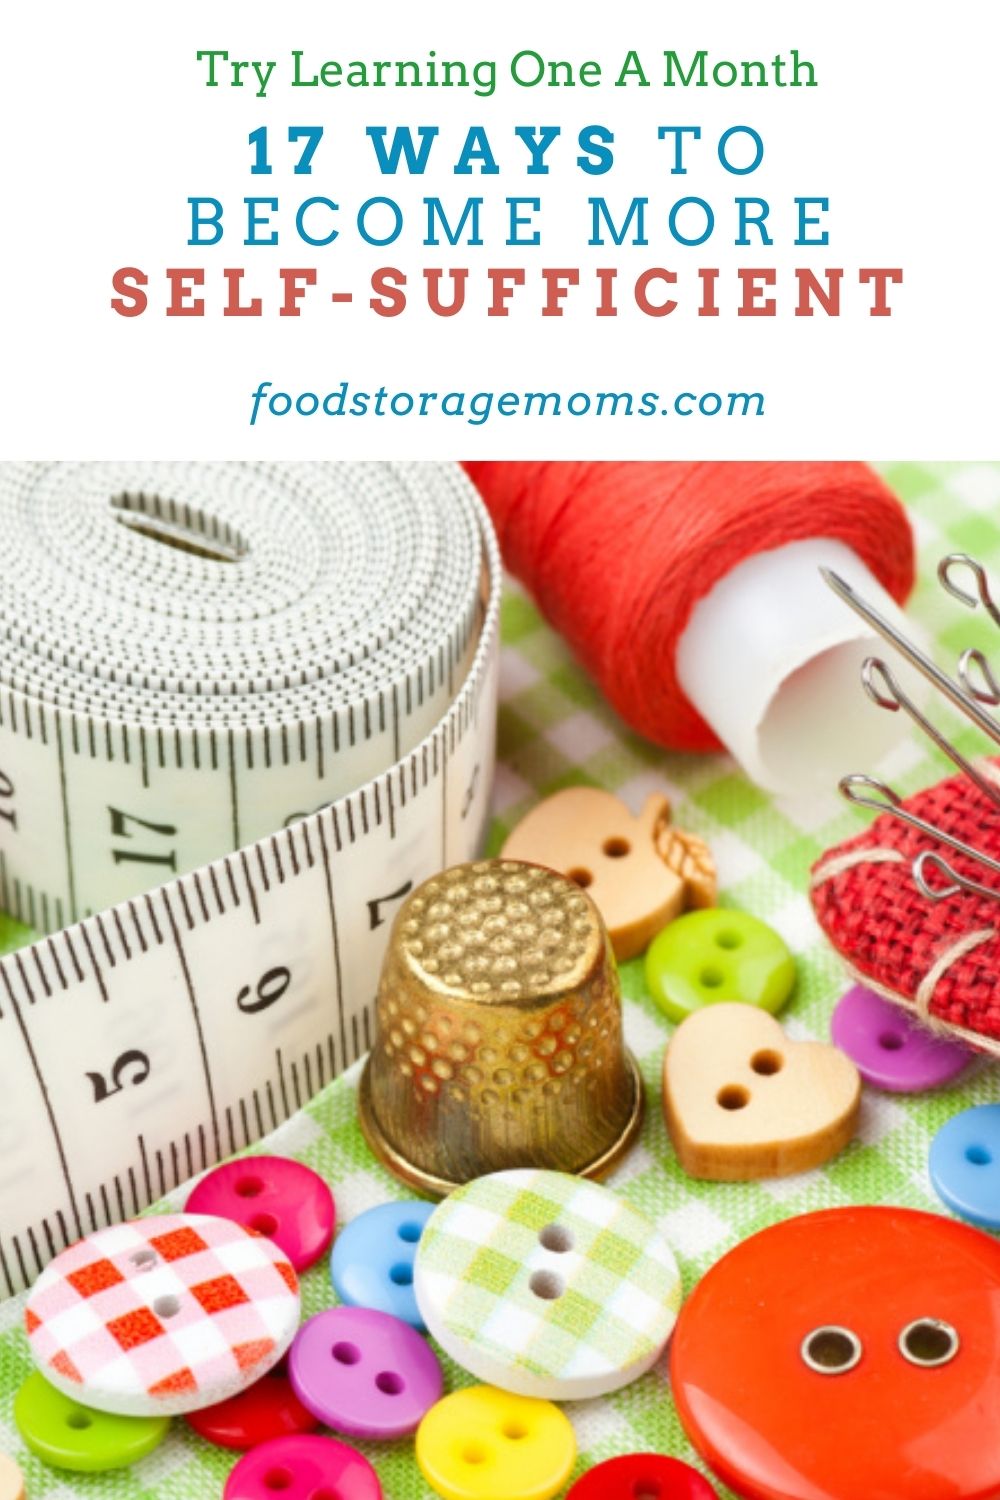 17 Ways to Become More Self-Sufficient